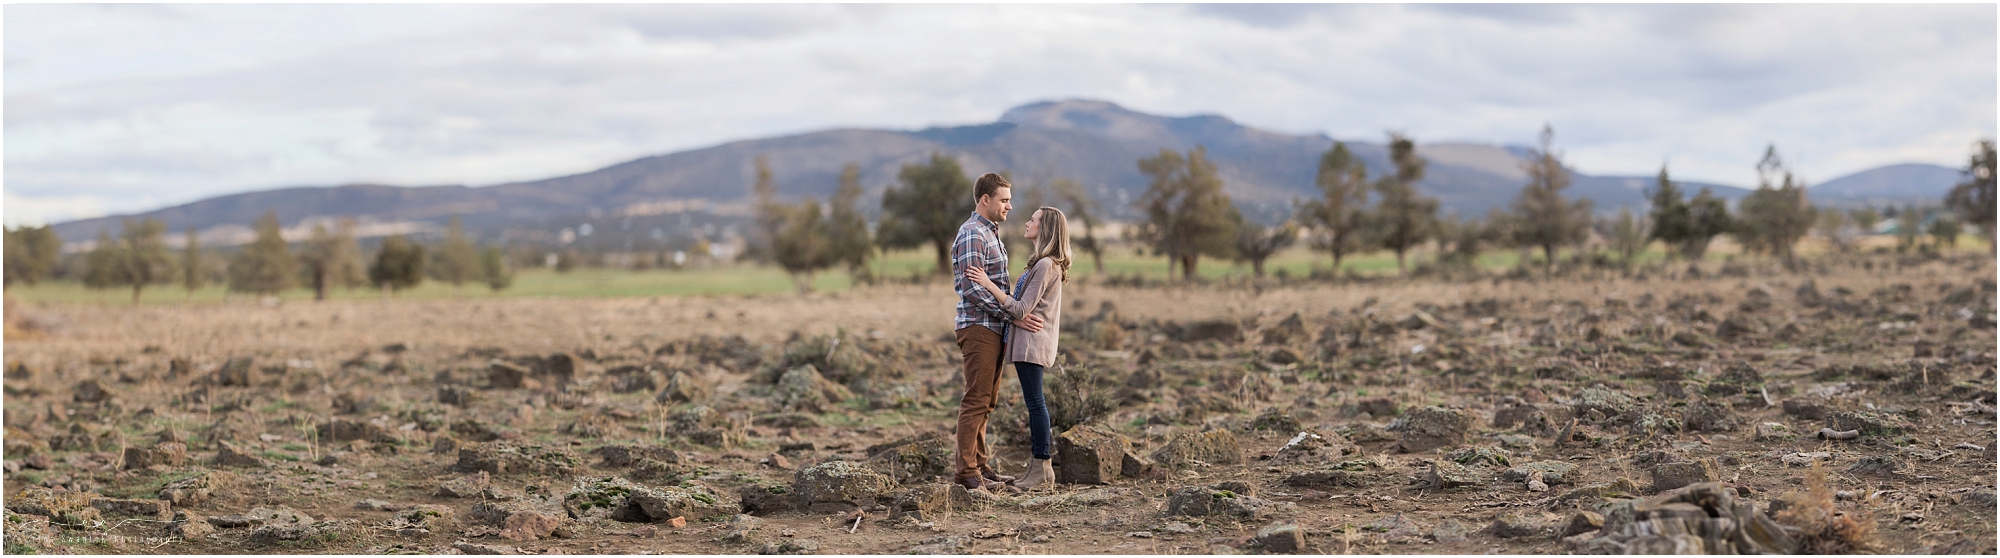 Powell Butte, Oregon is such a beautiful location for an outdoor lifestyle engagement session. 